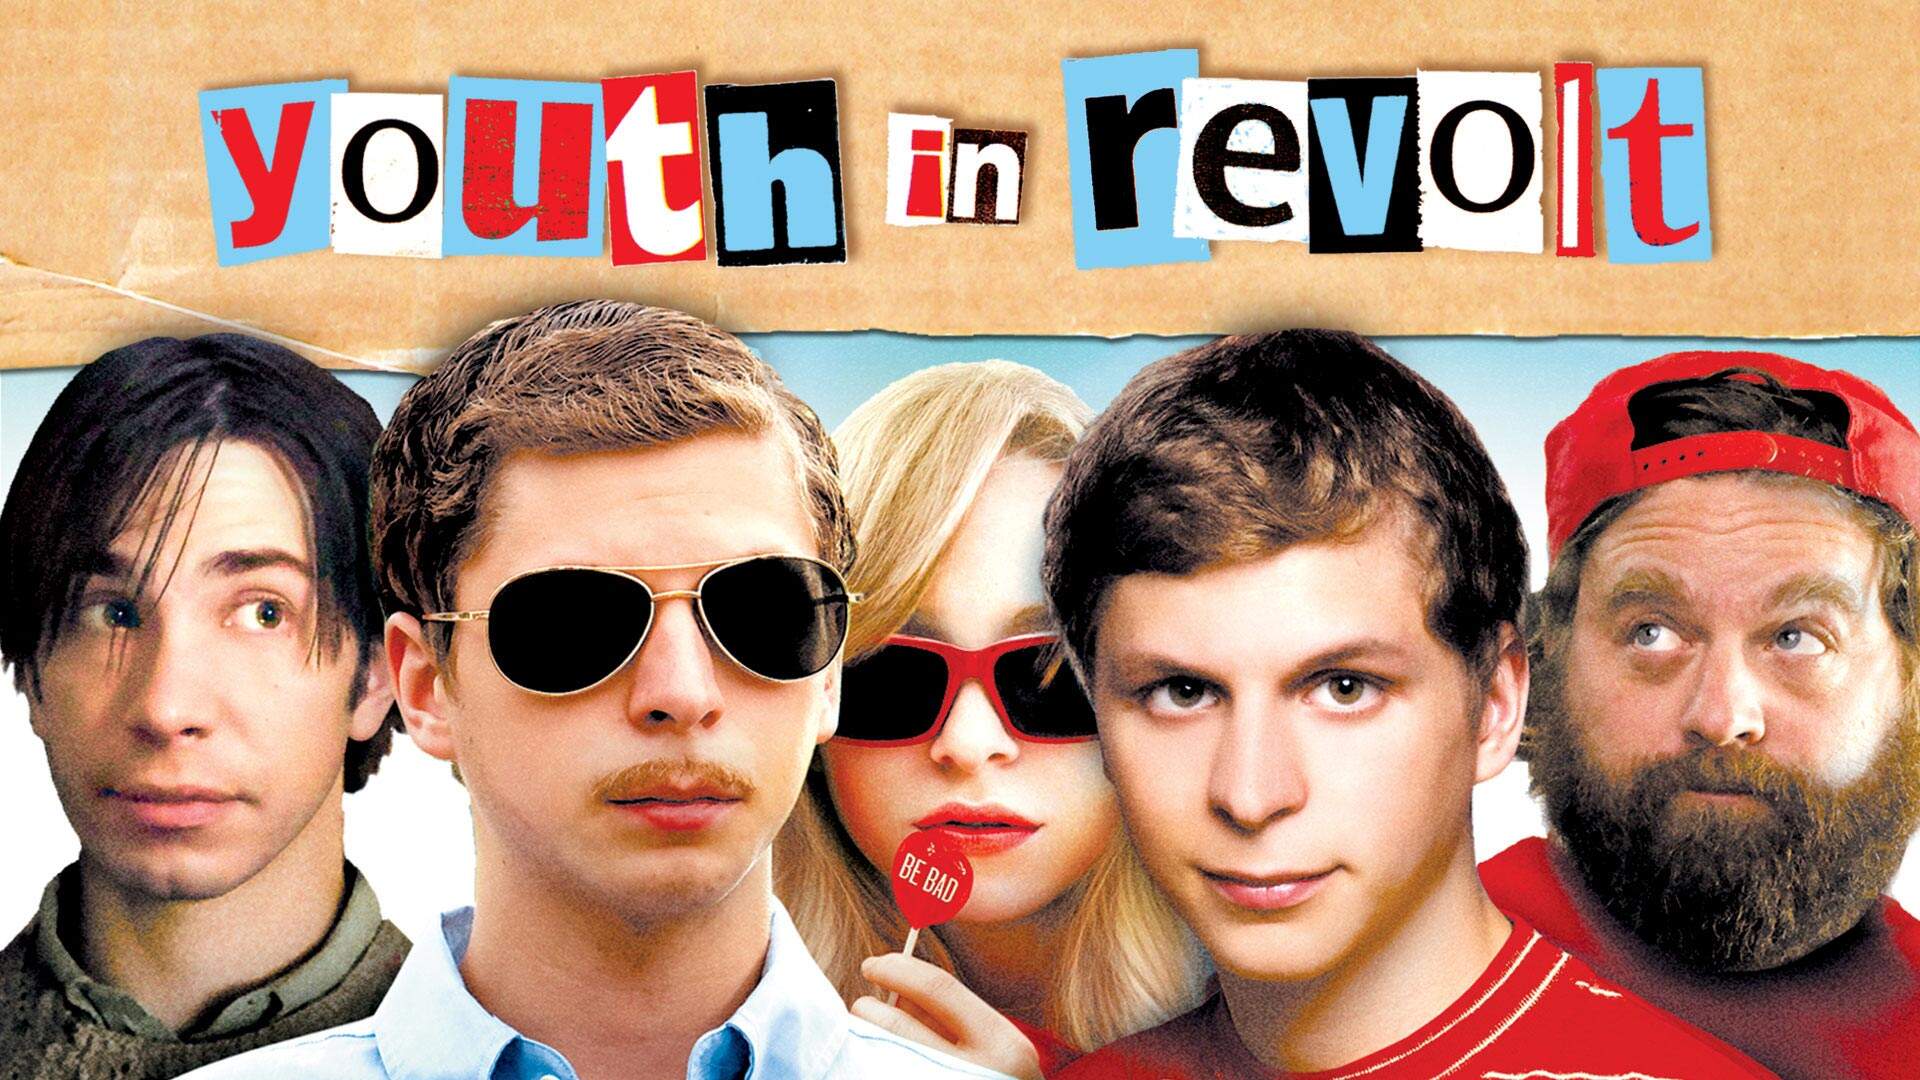 42-facts-about-the-movie-youth-in-revolt